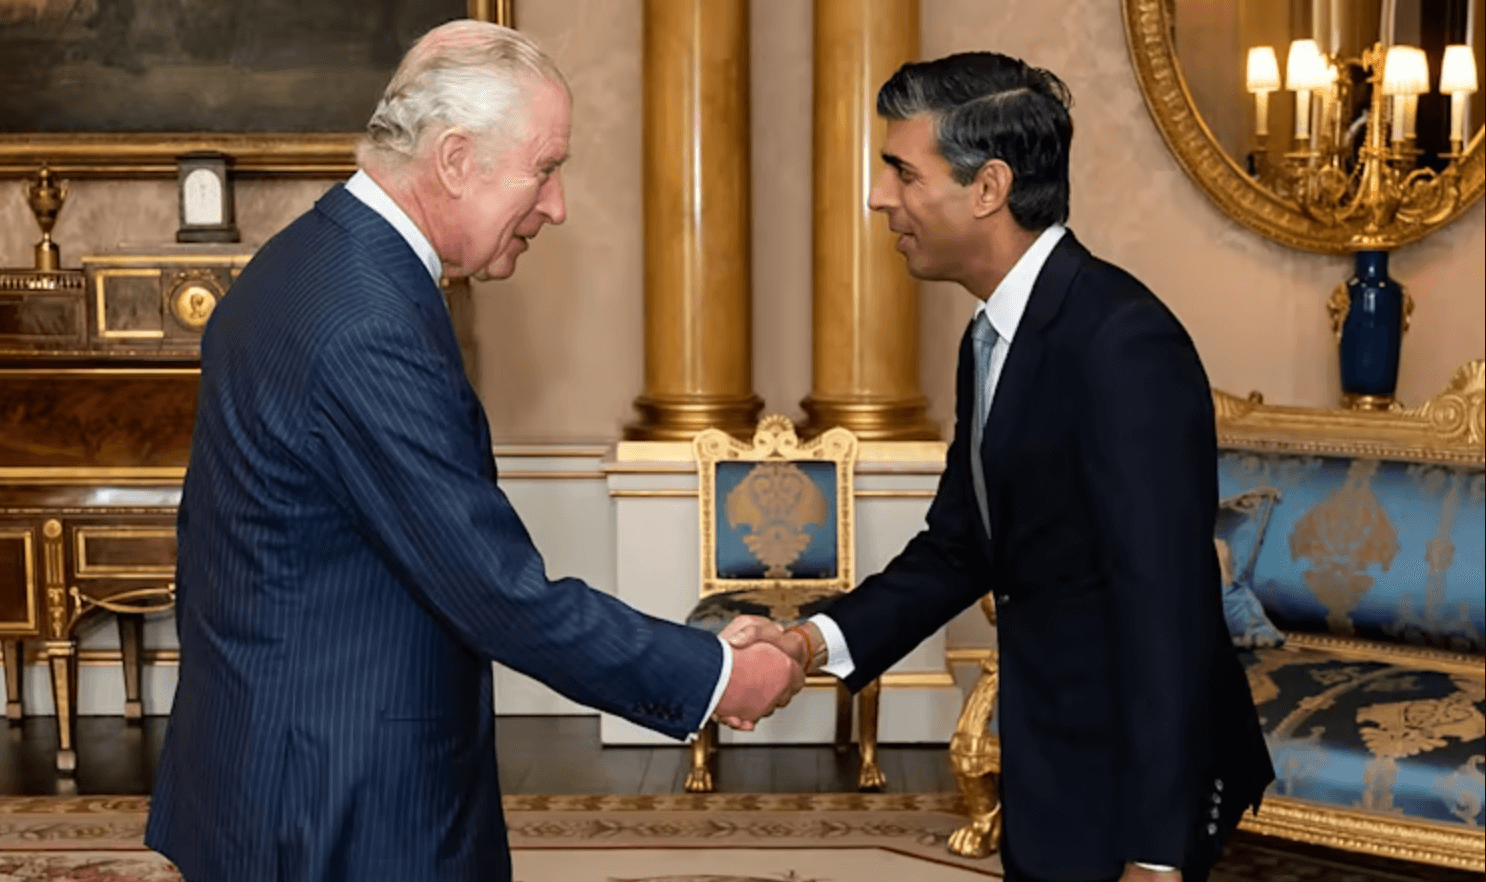 Rishi Sunak Promises To Fix the Economy After Meeting King Charles